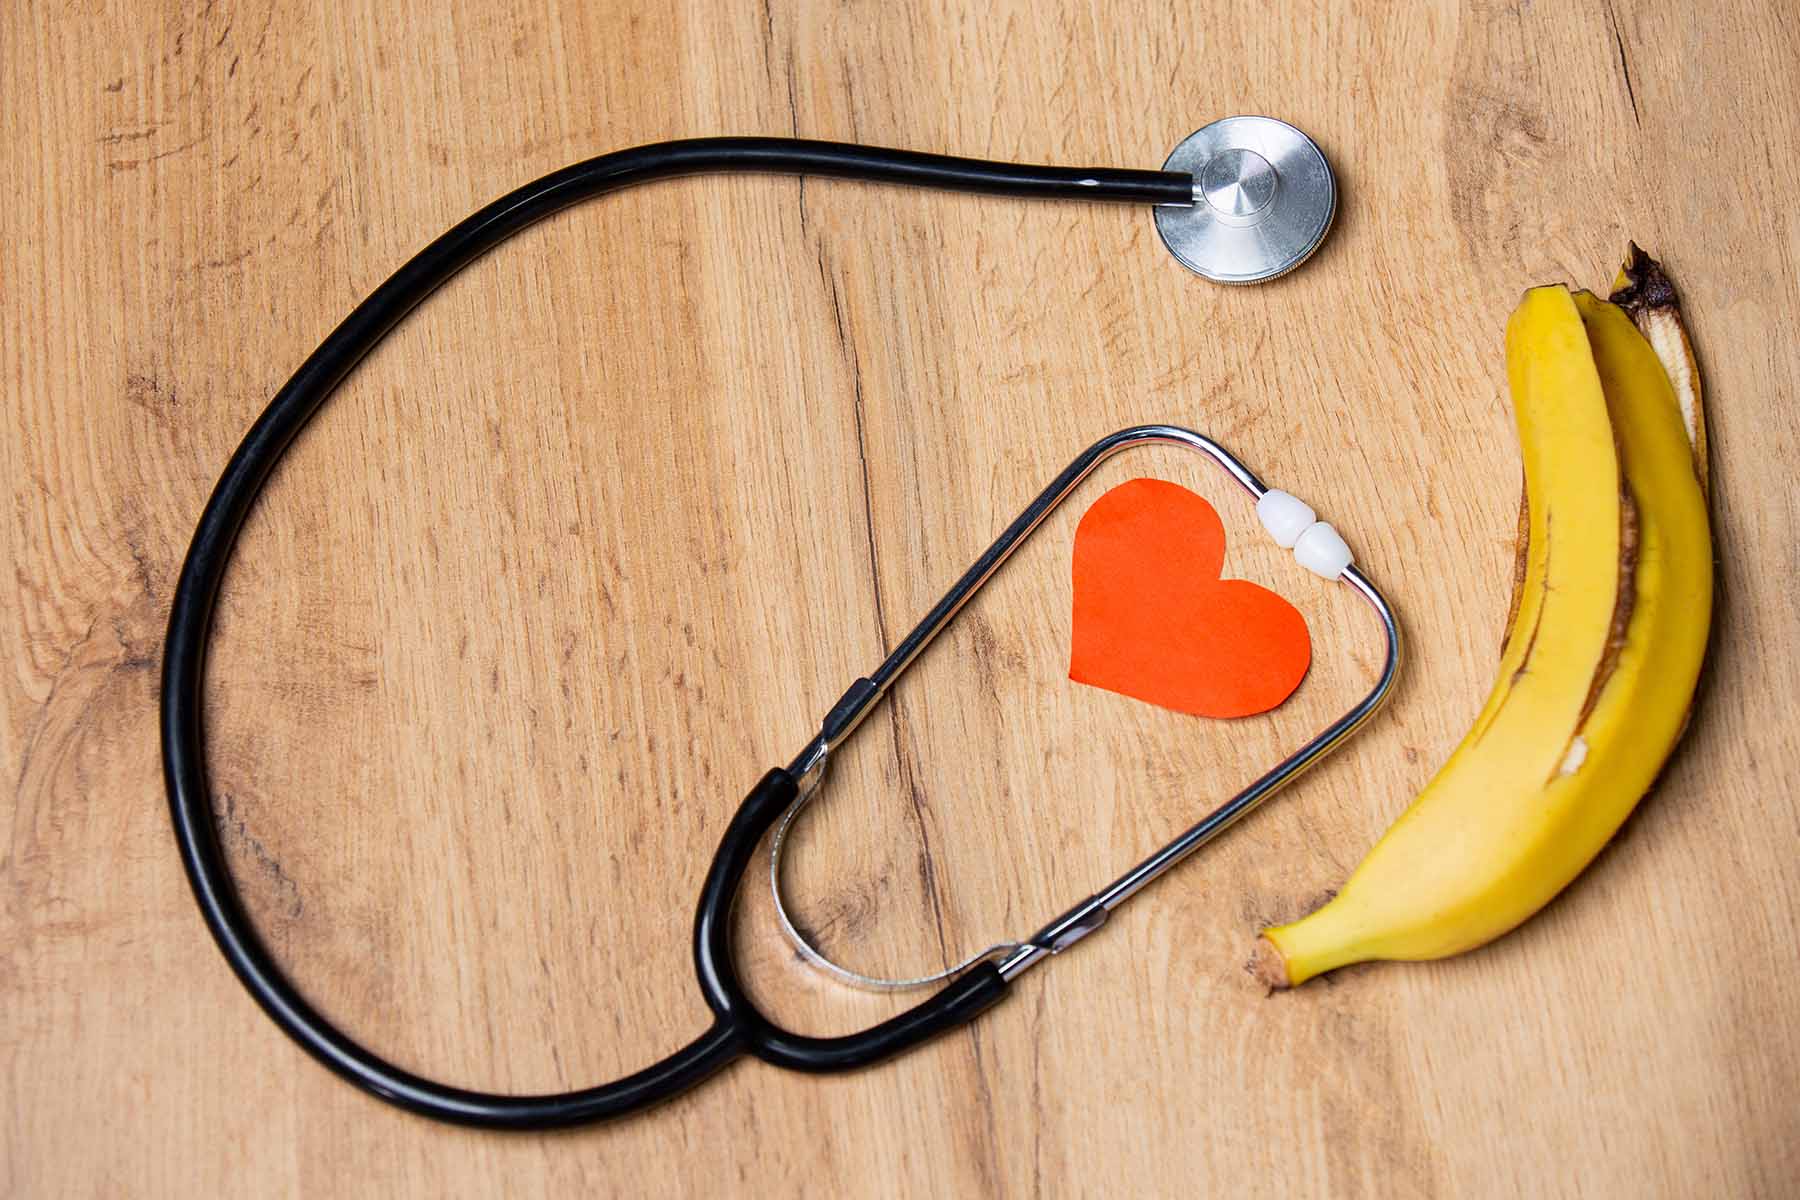 Stethoscope and heart cutout with banana on wood backdrop